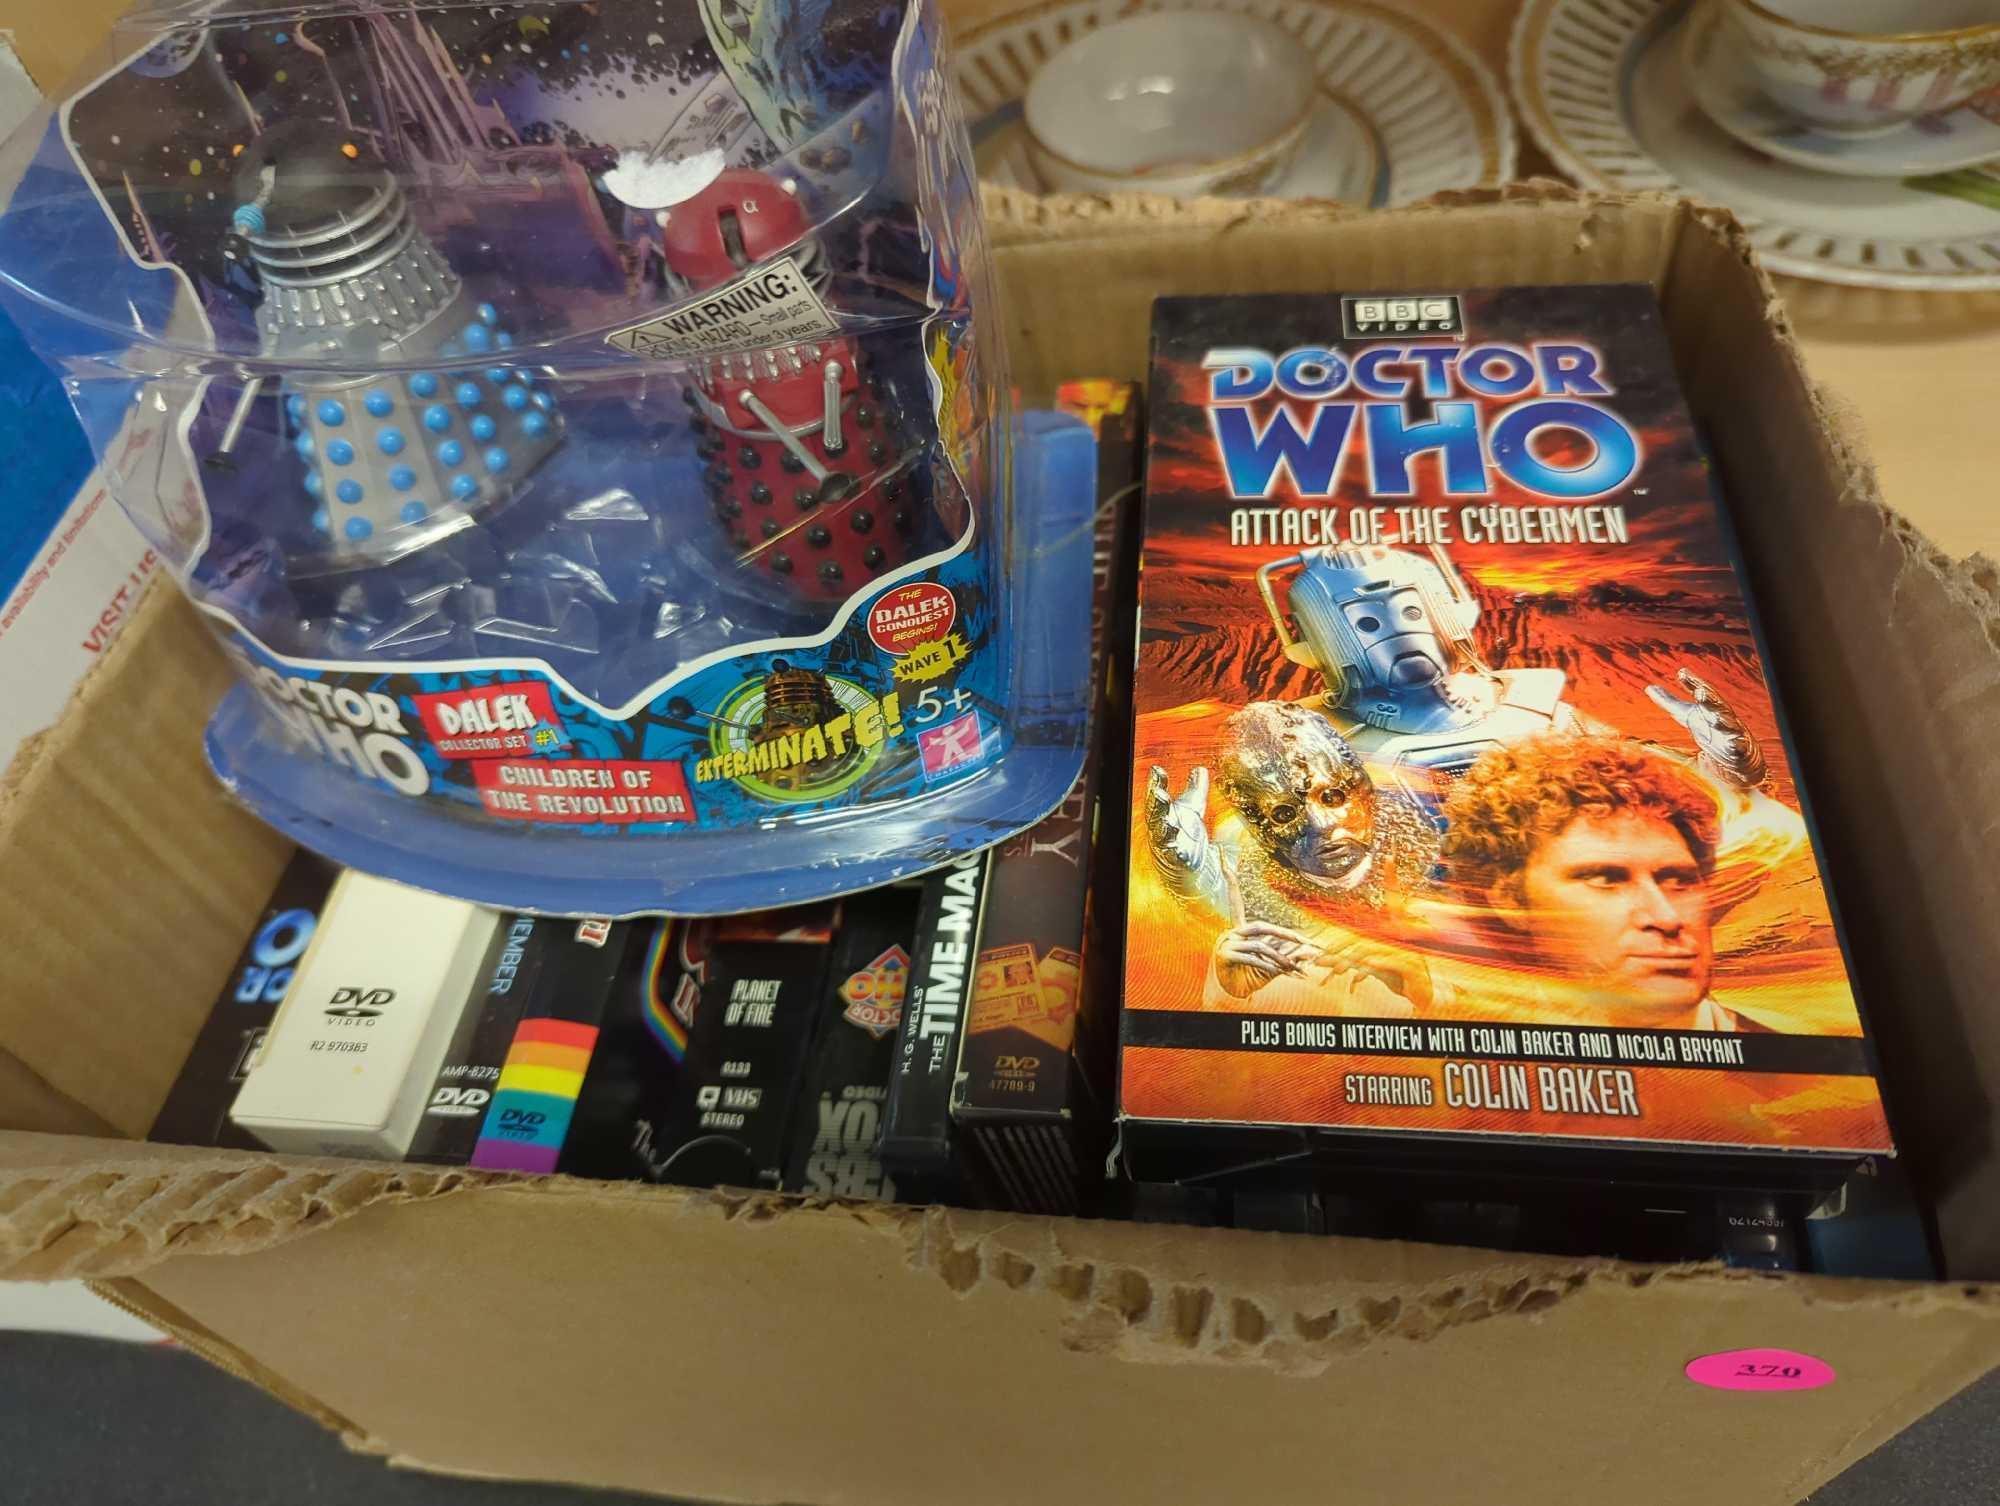 Box Lot of Assorted Items to Include, BBC Doctor Who "Attack Of The Cyberman" Video Tape, Excalibur